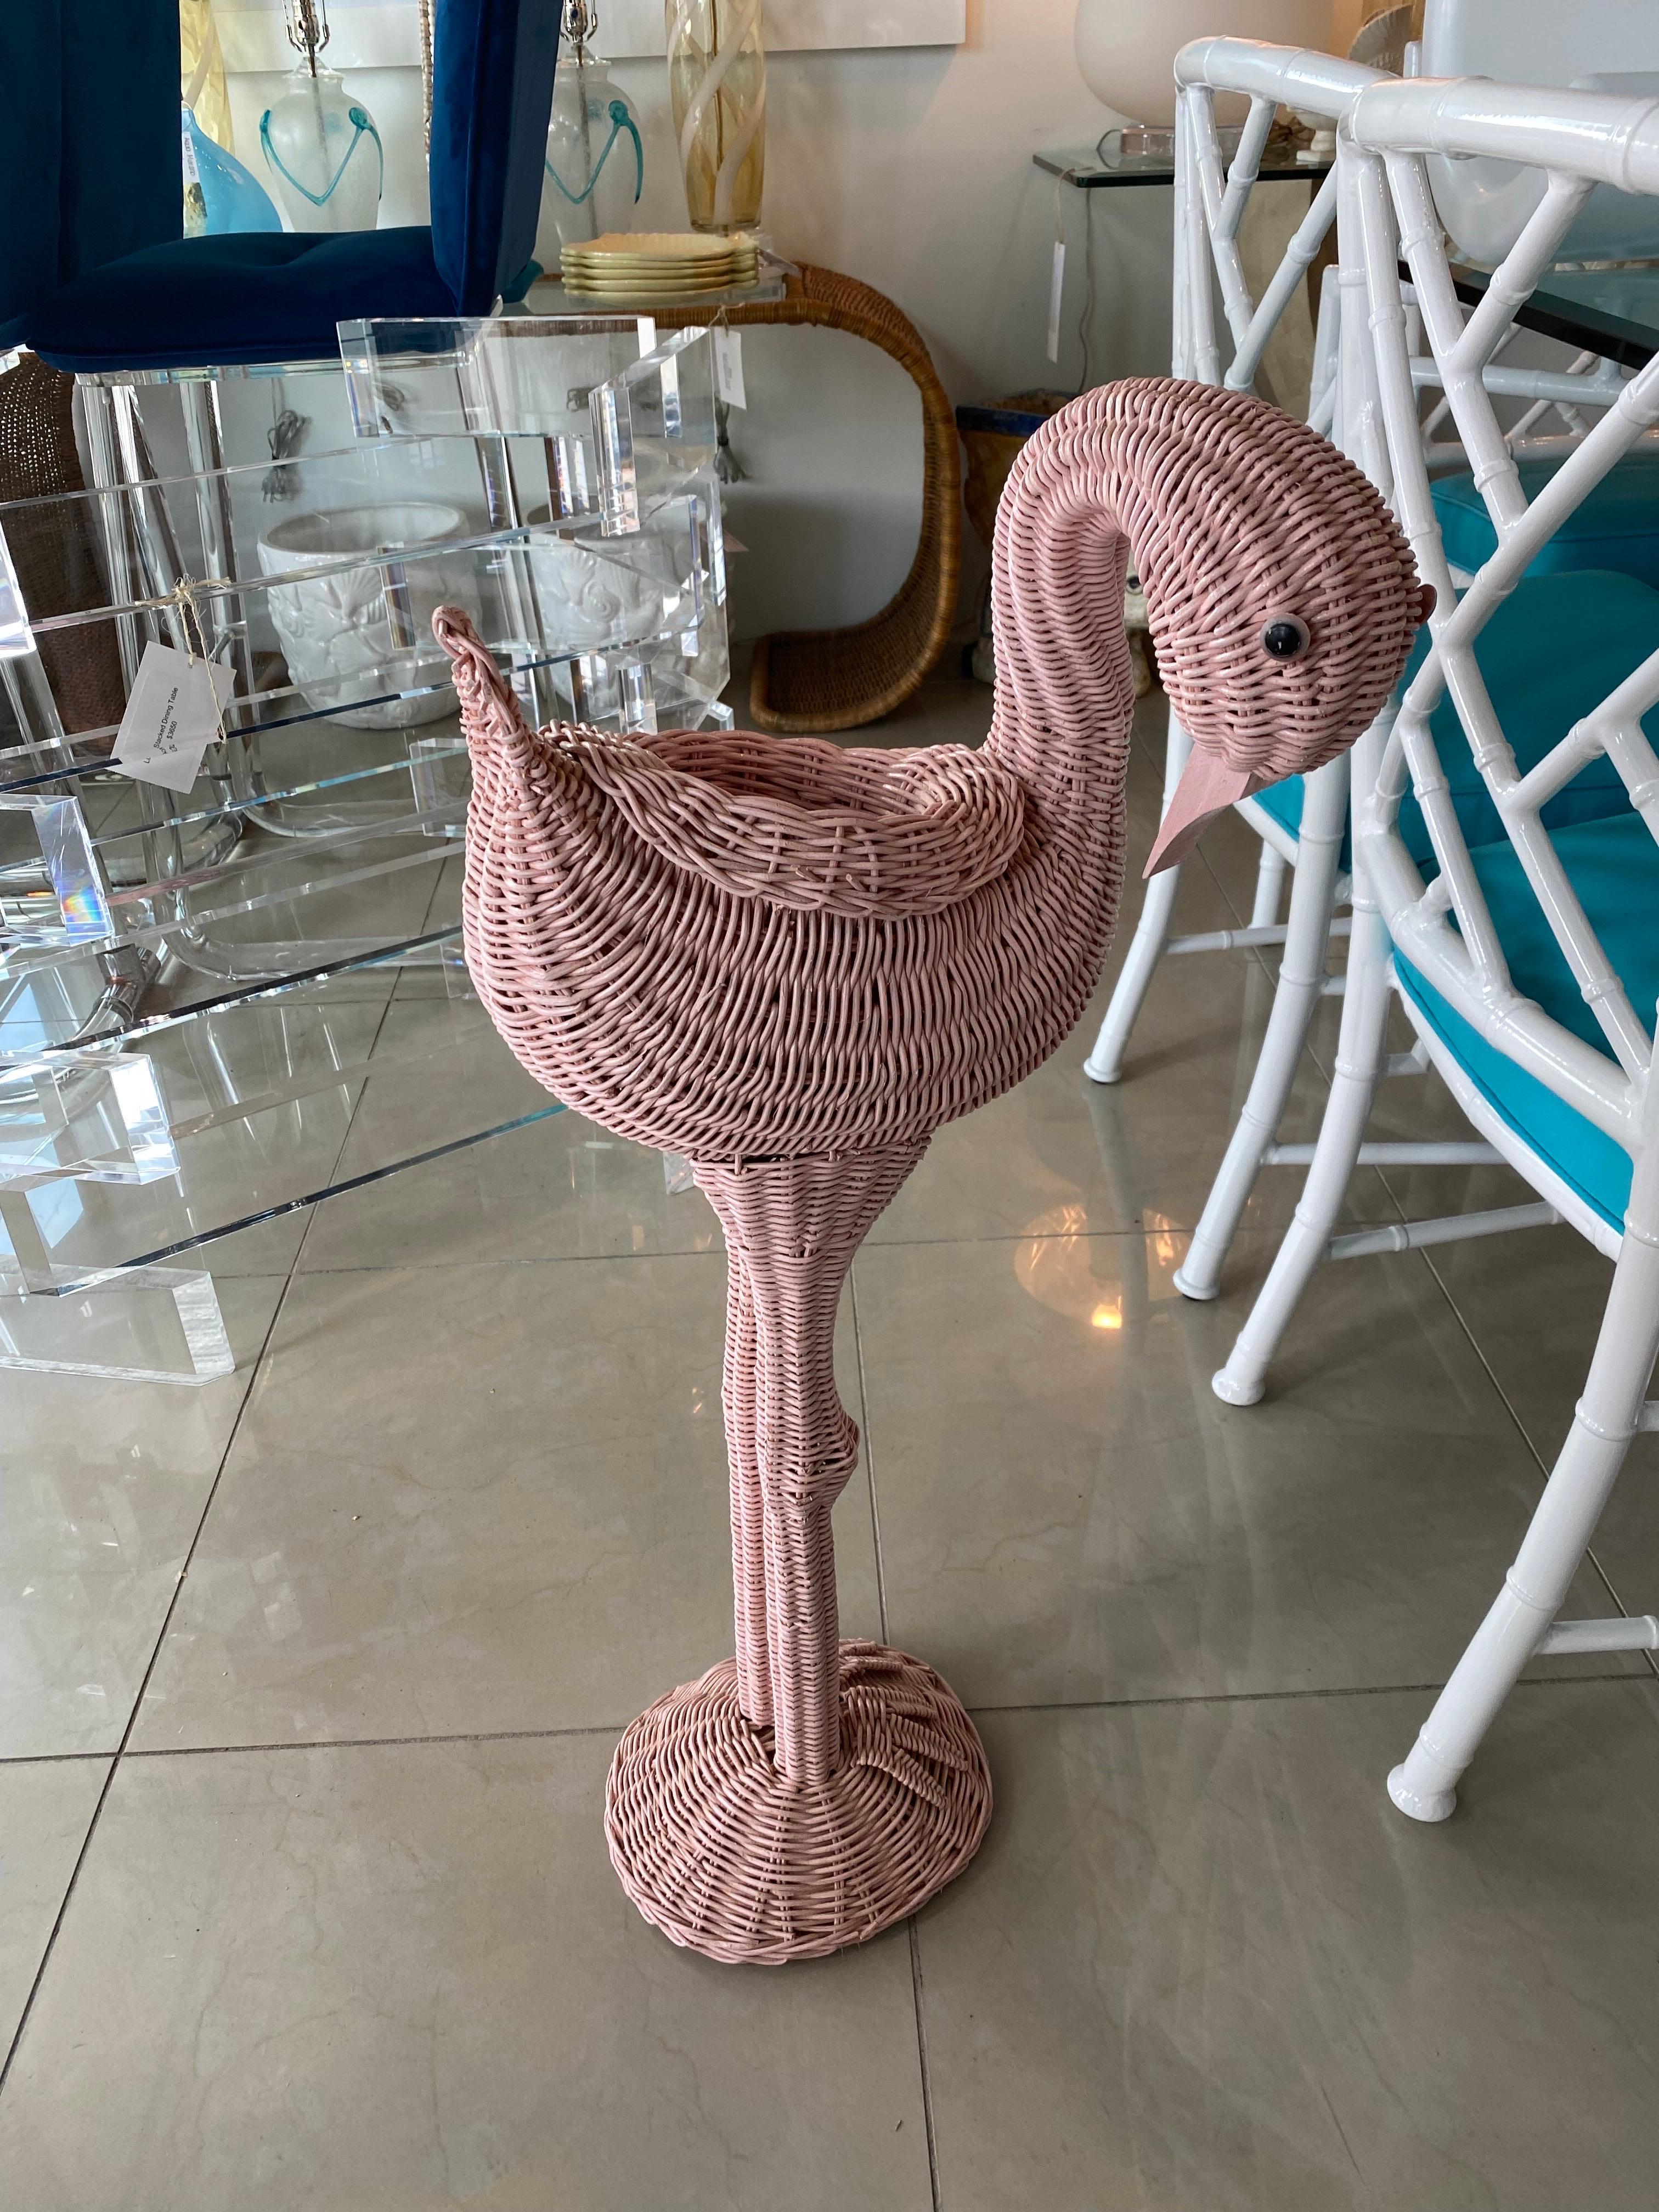 Vintage Palm Beach Pink Wicker Flamingo Plant Stand Pot Holder Garden In Good Condition For Sale In West Palm Beach, FL